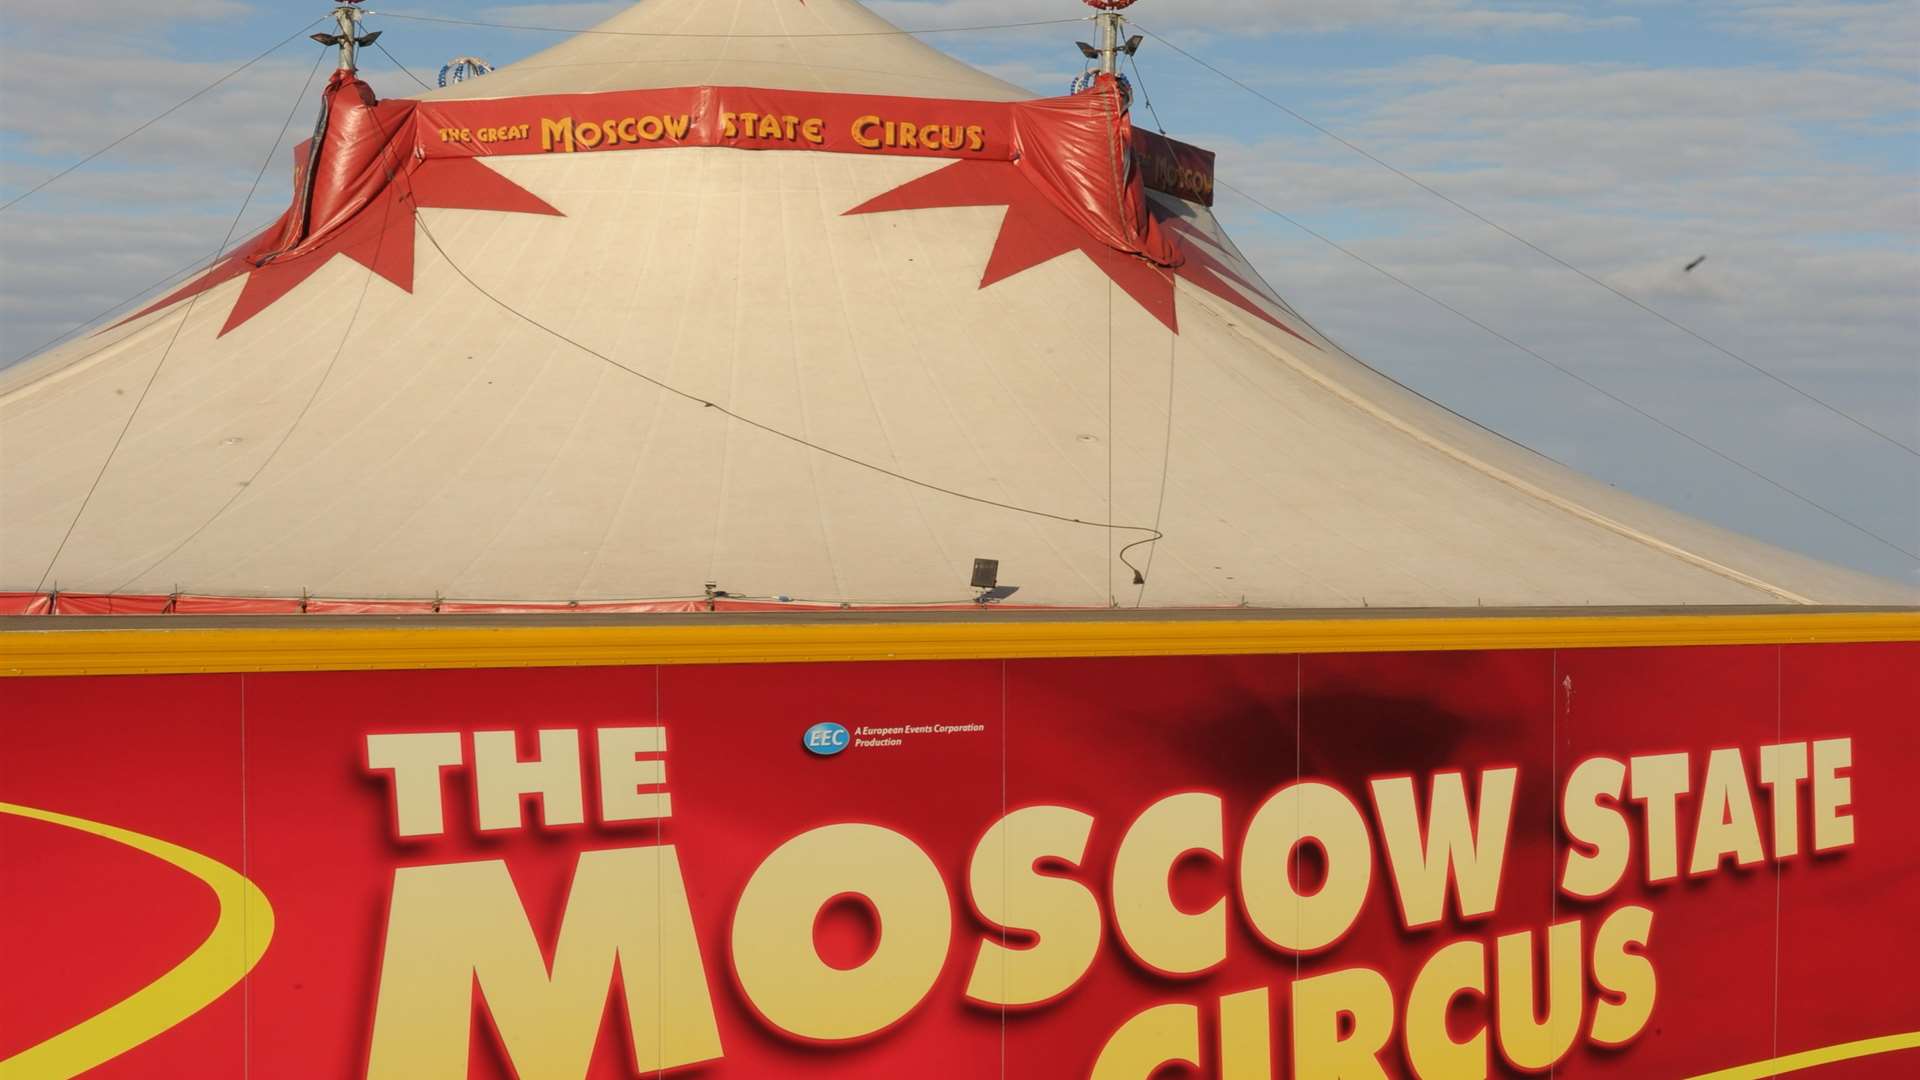 The circus will be in Deal, Tunbridge Wells and Folkestone